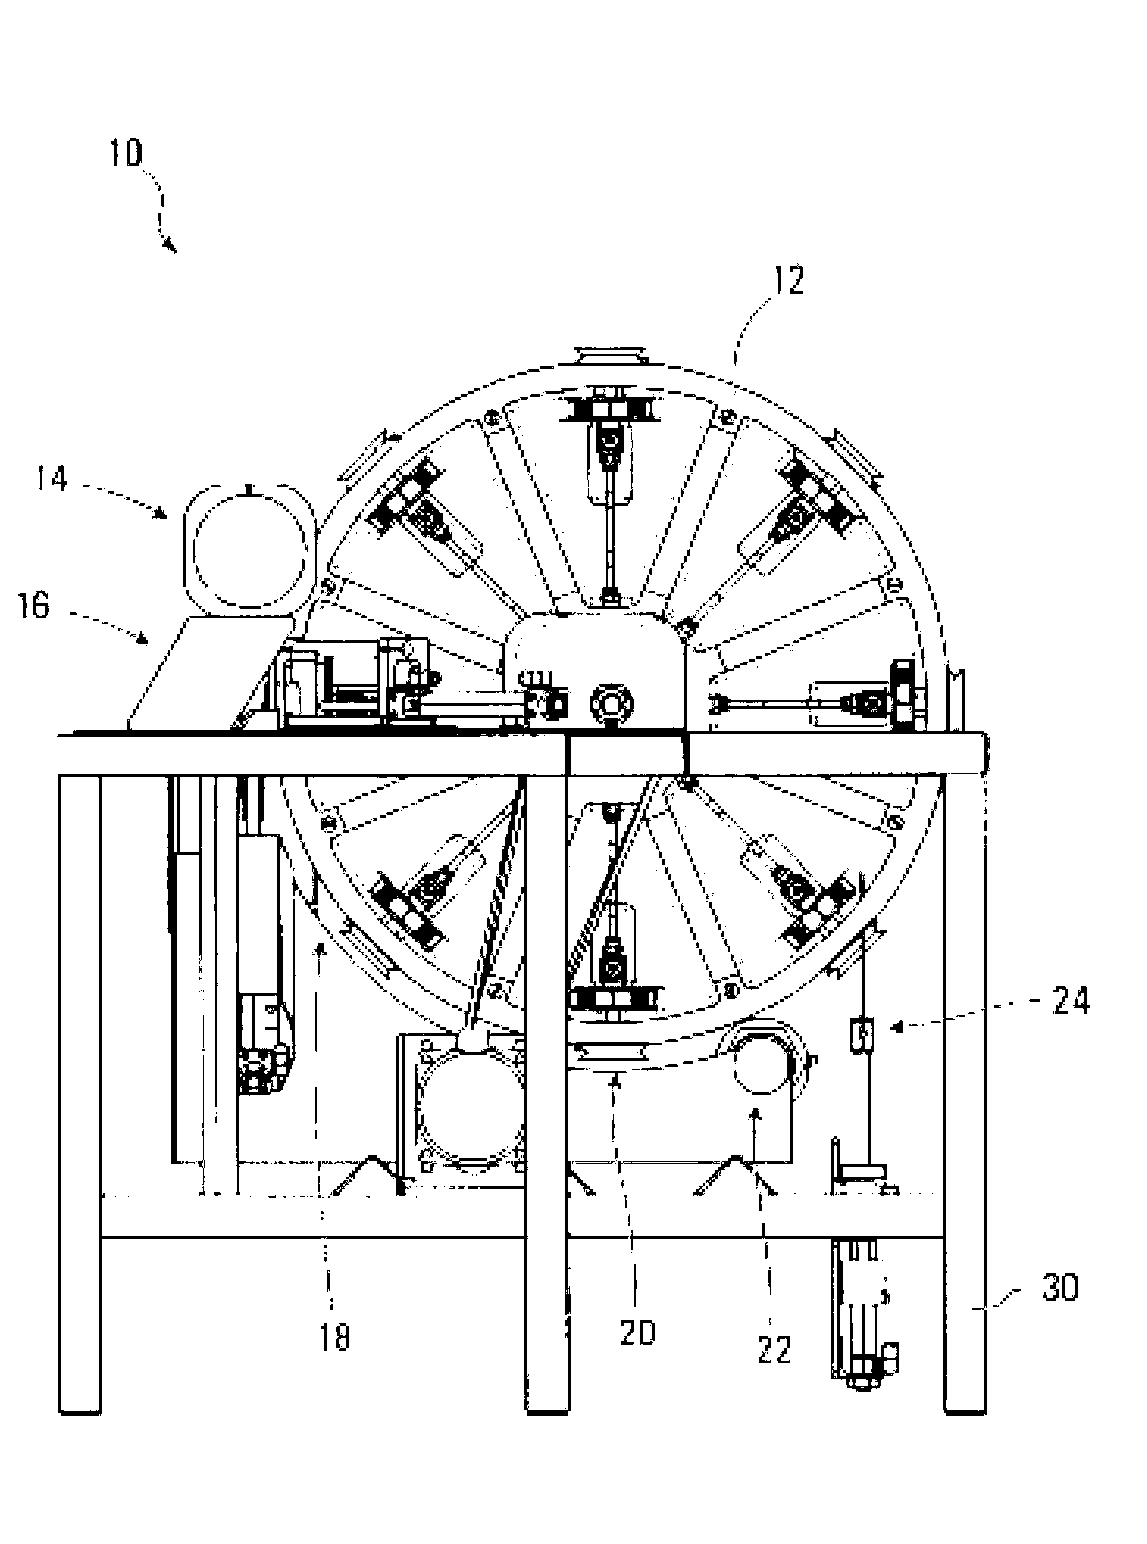 Mollusc processing apparatus and related methods